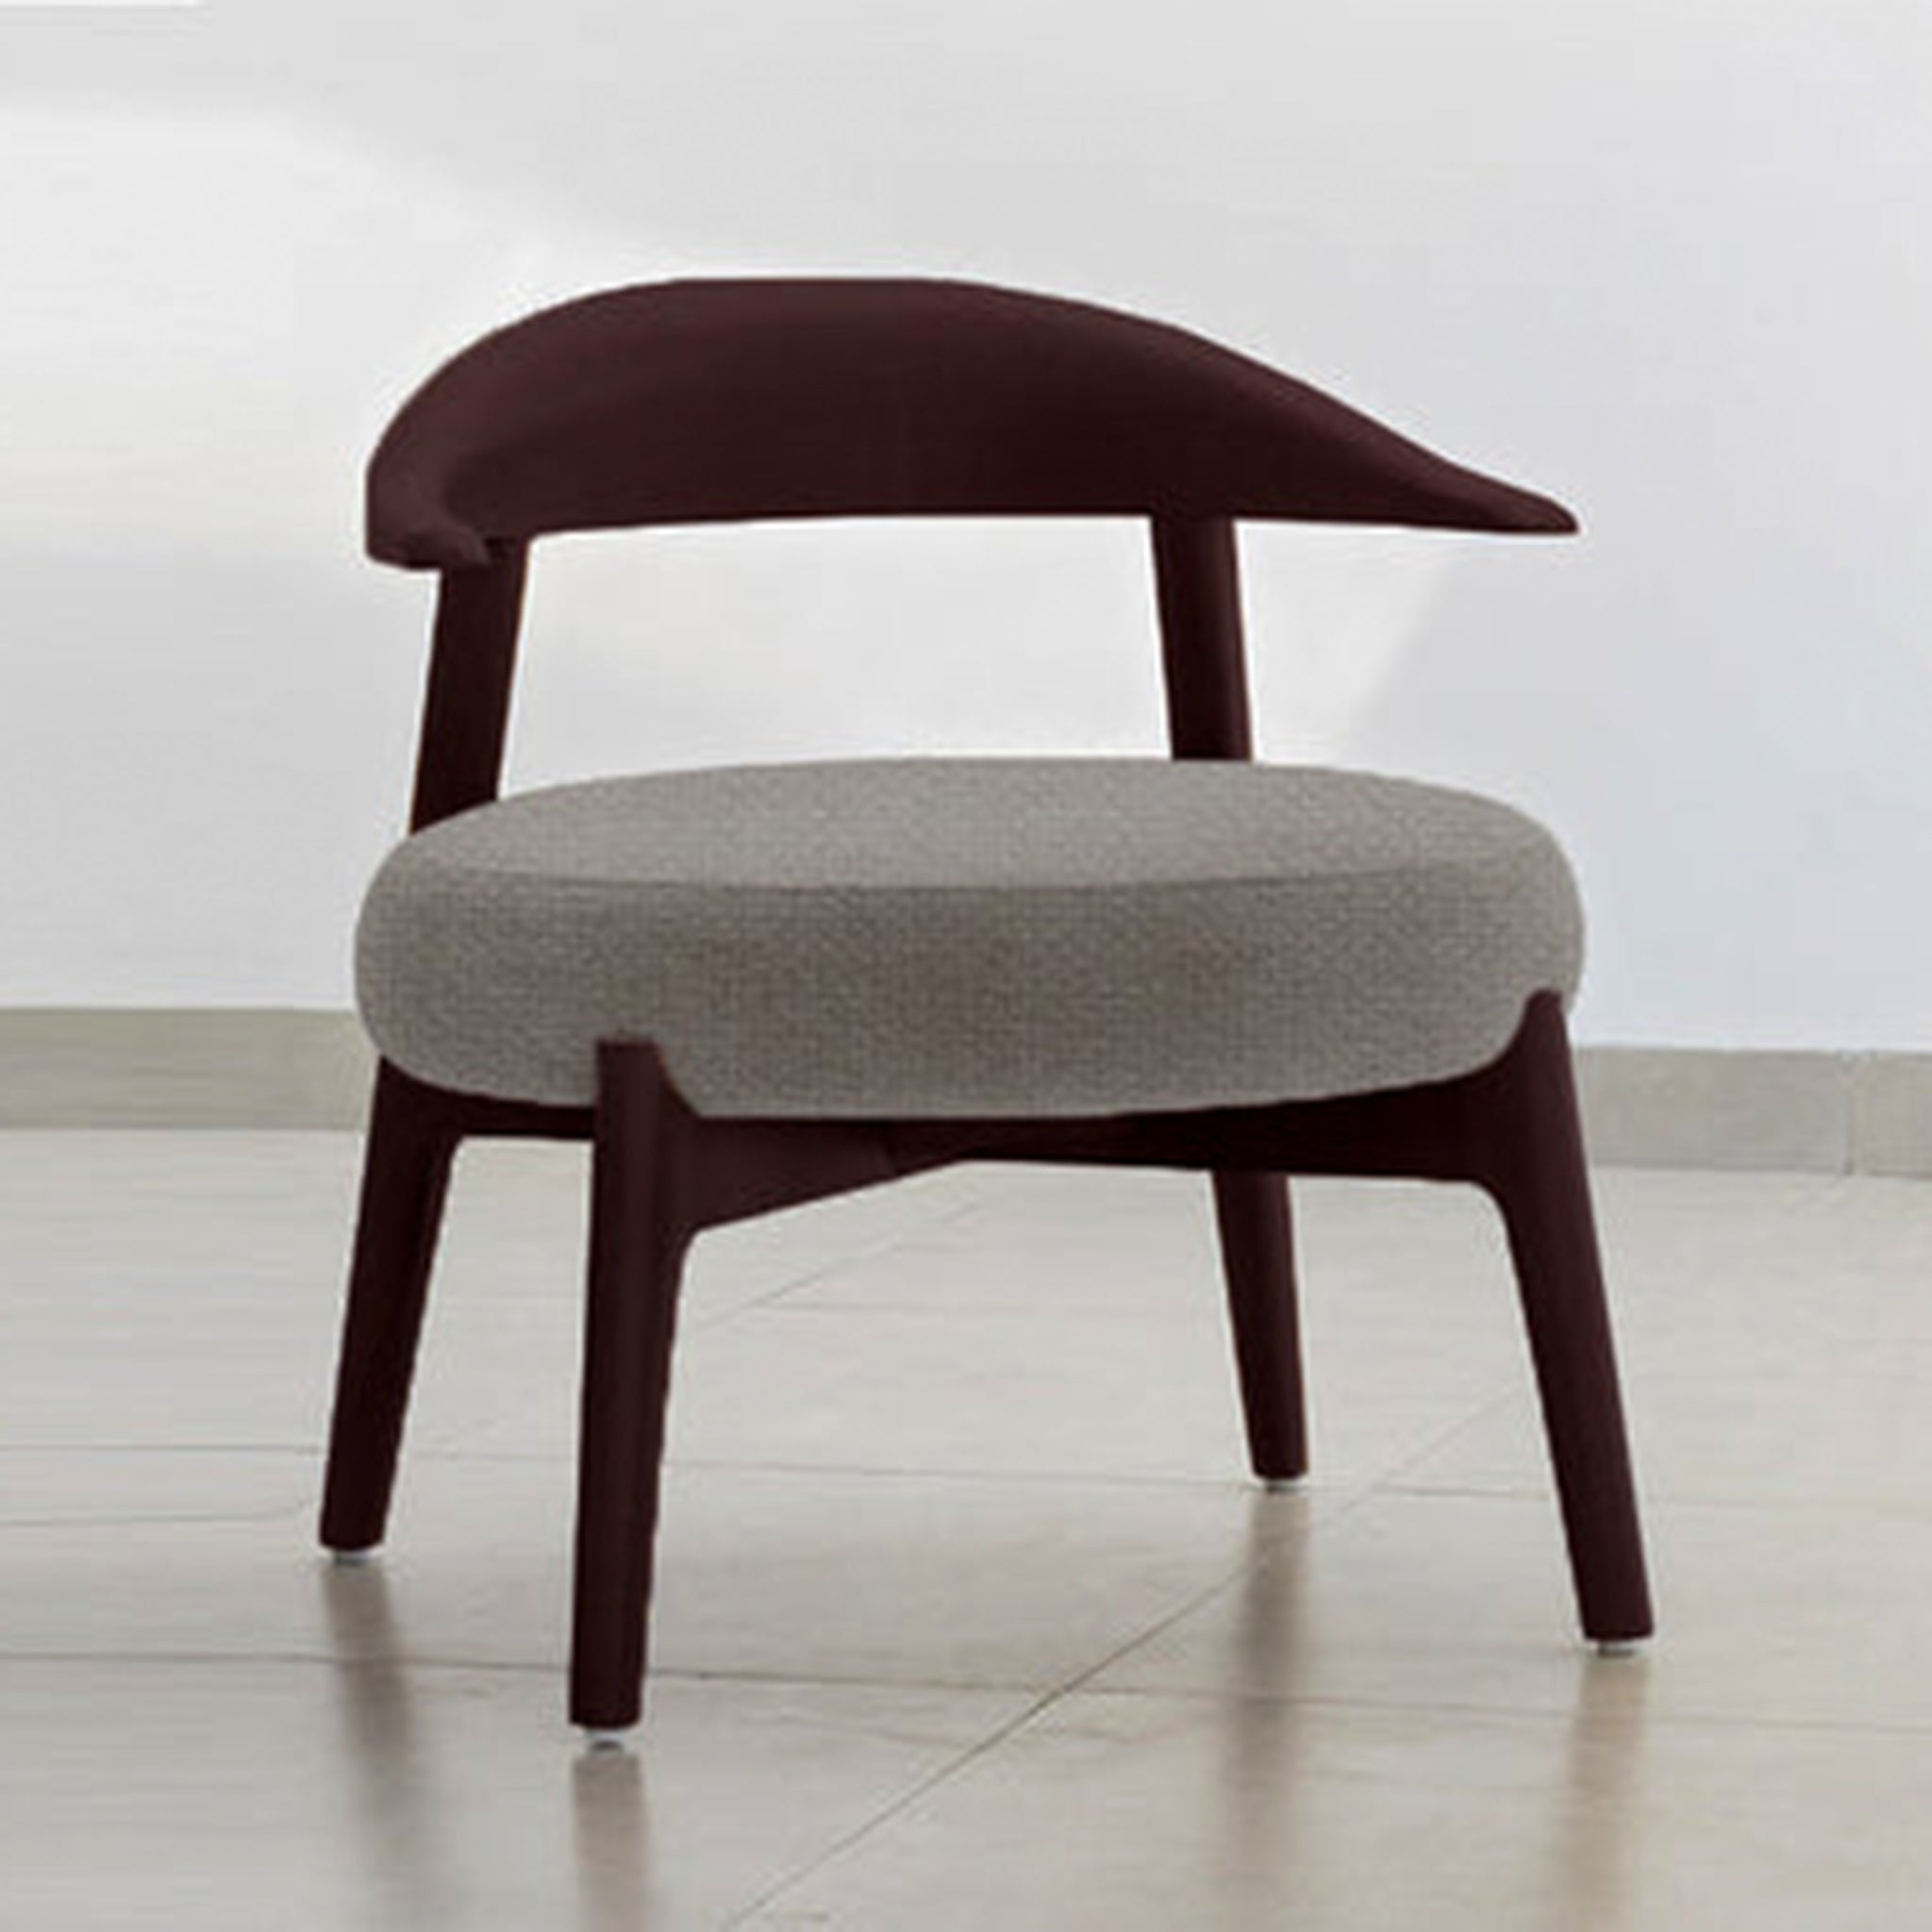 "The Hyde Accent Chair with sleek wooden backrest and plush seating"